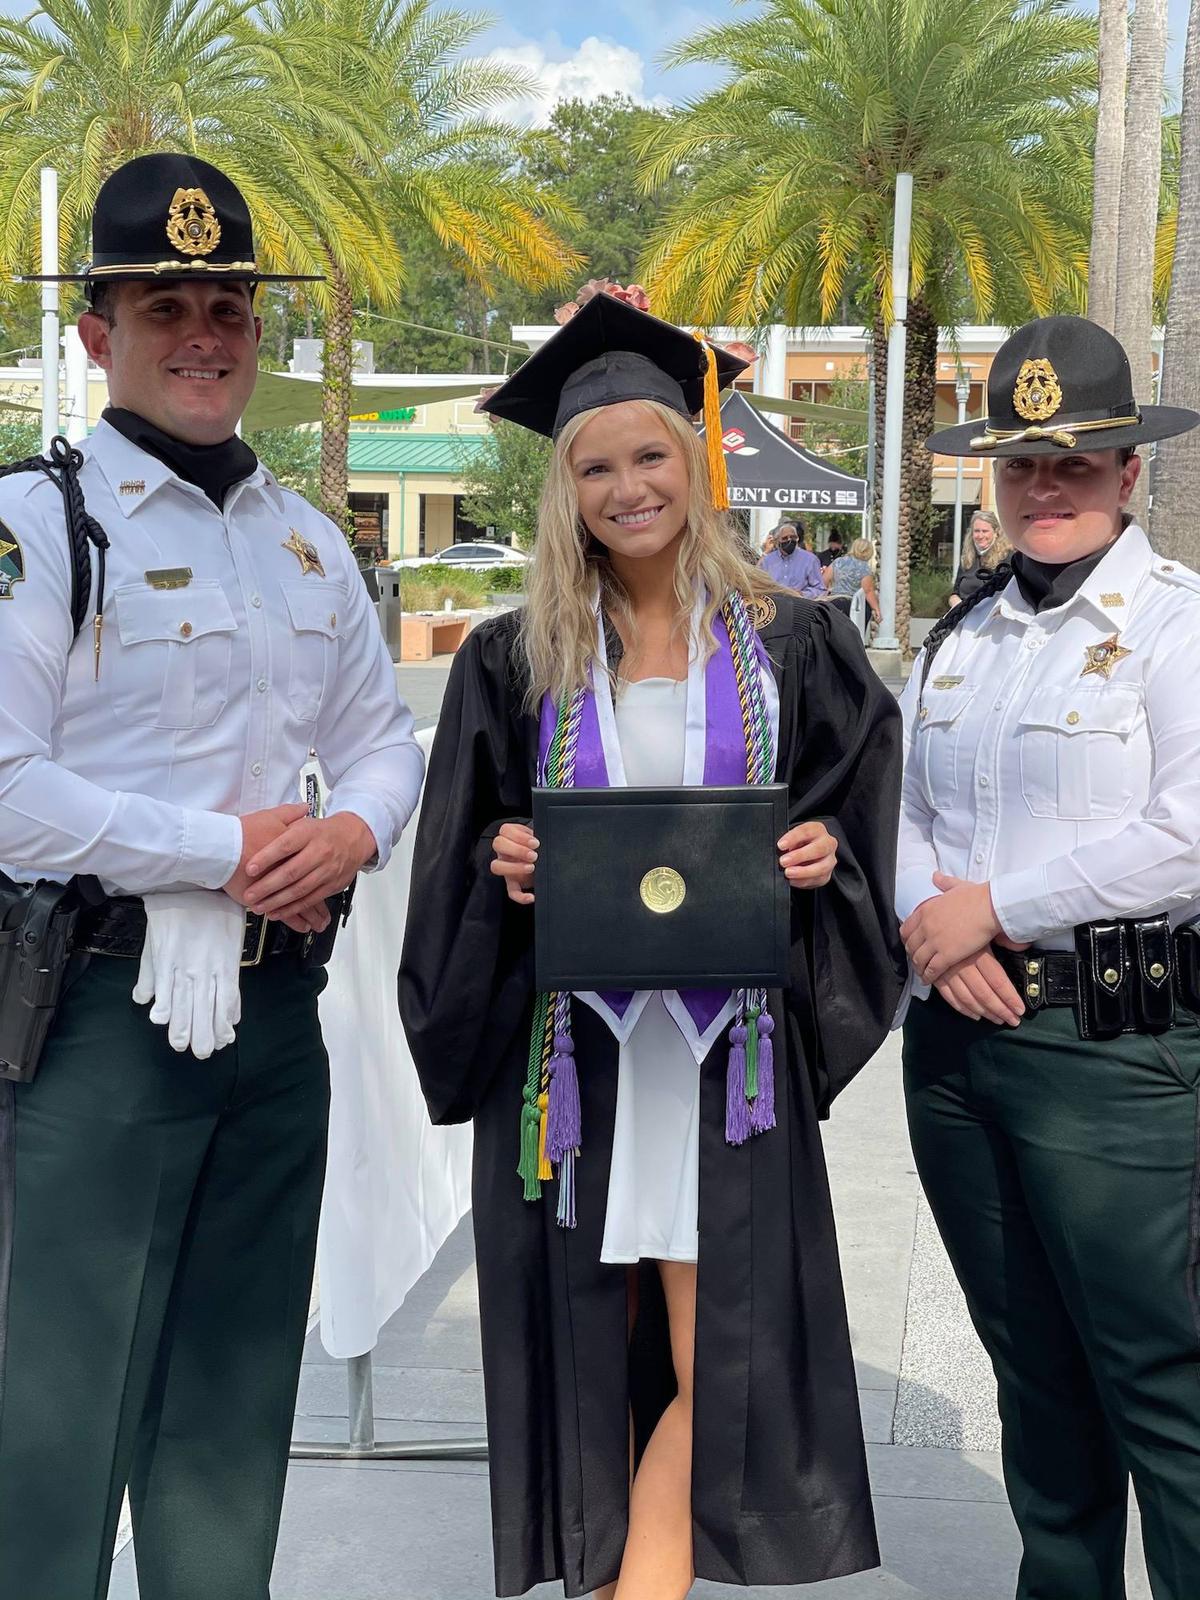 The Pasco County Sheriffs Office sent an honor guard and a Huey military helicopter over to Aleena's house to congratulate her. (Courtesy of <a href="https://www.facebook.com/teresa.kondek">Teresa Kondek</a>)